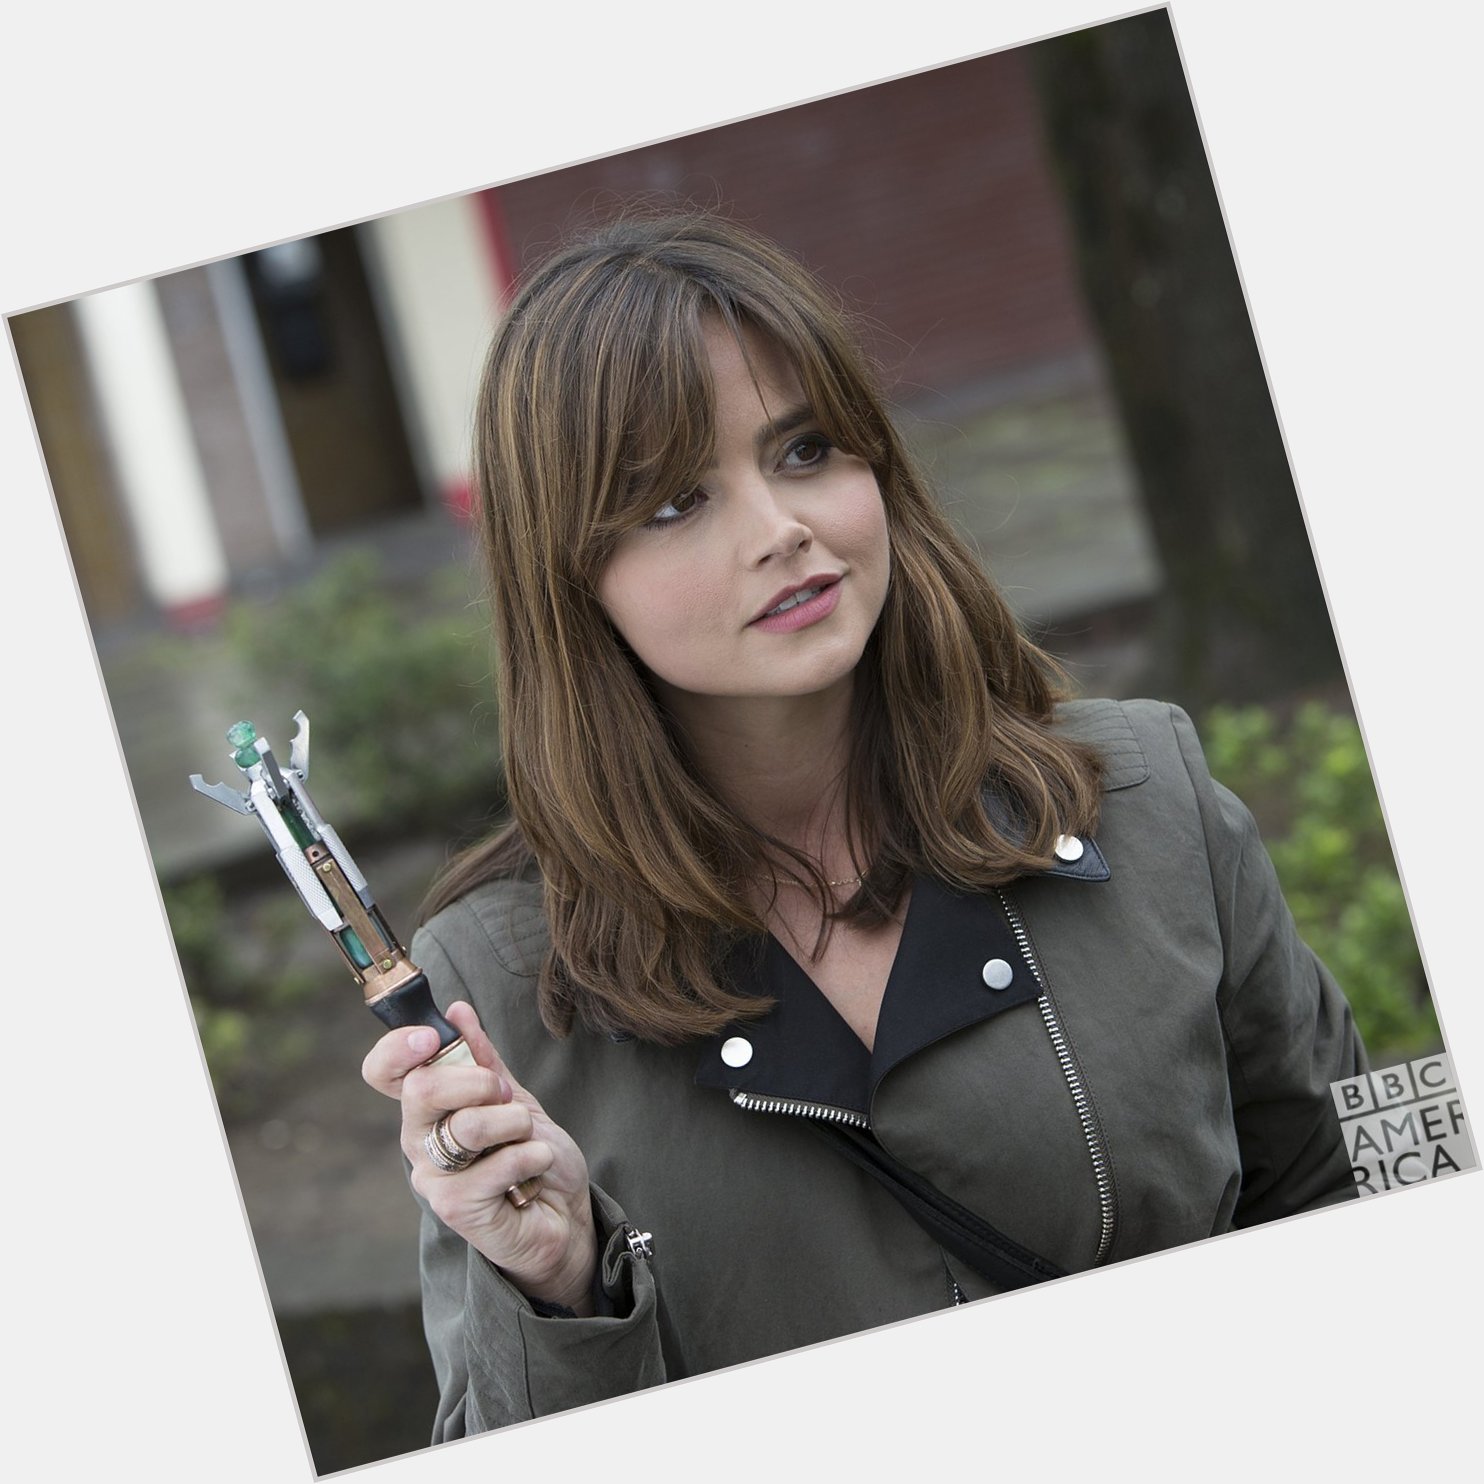 Wishing a very happy birthday to who played the impossible Clara Oswald! 